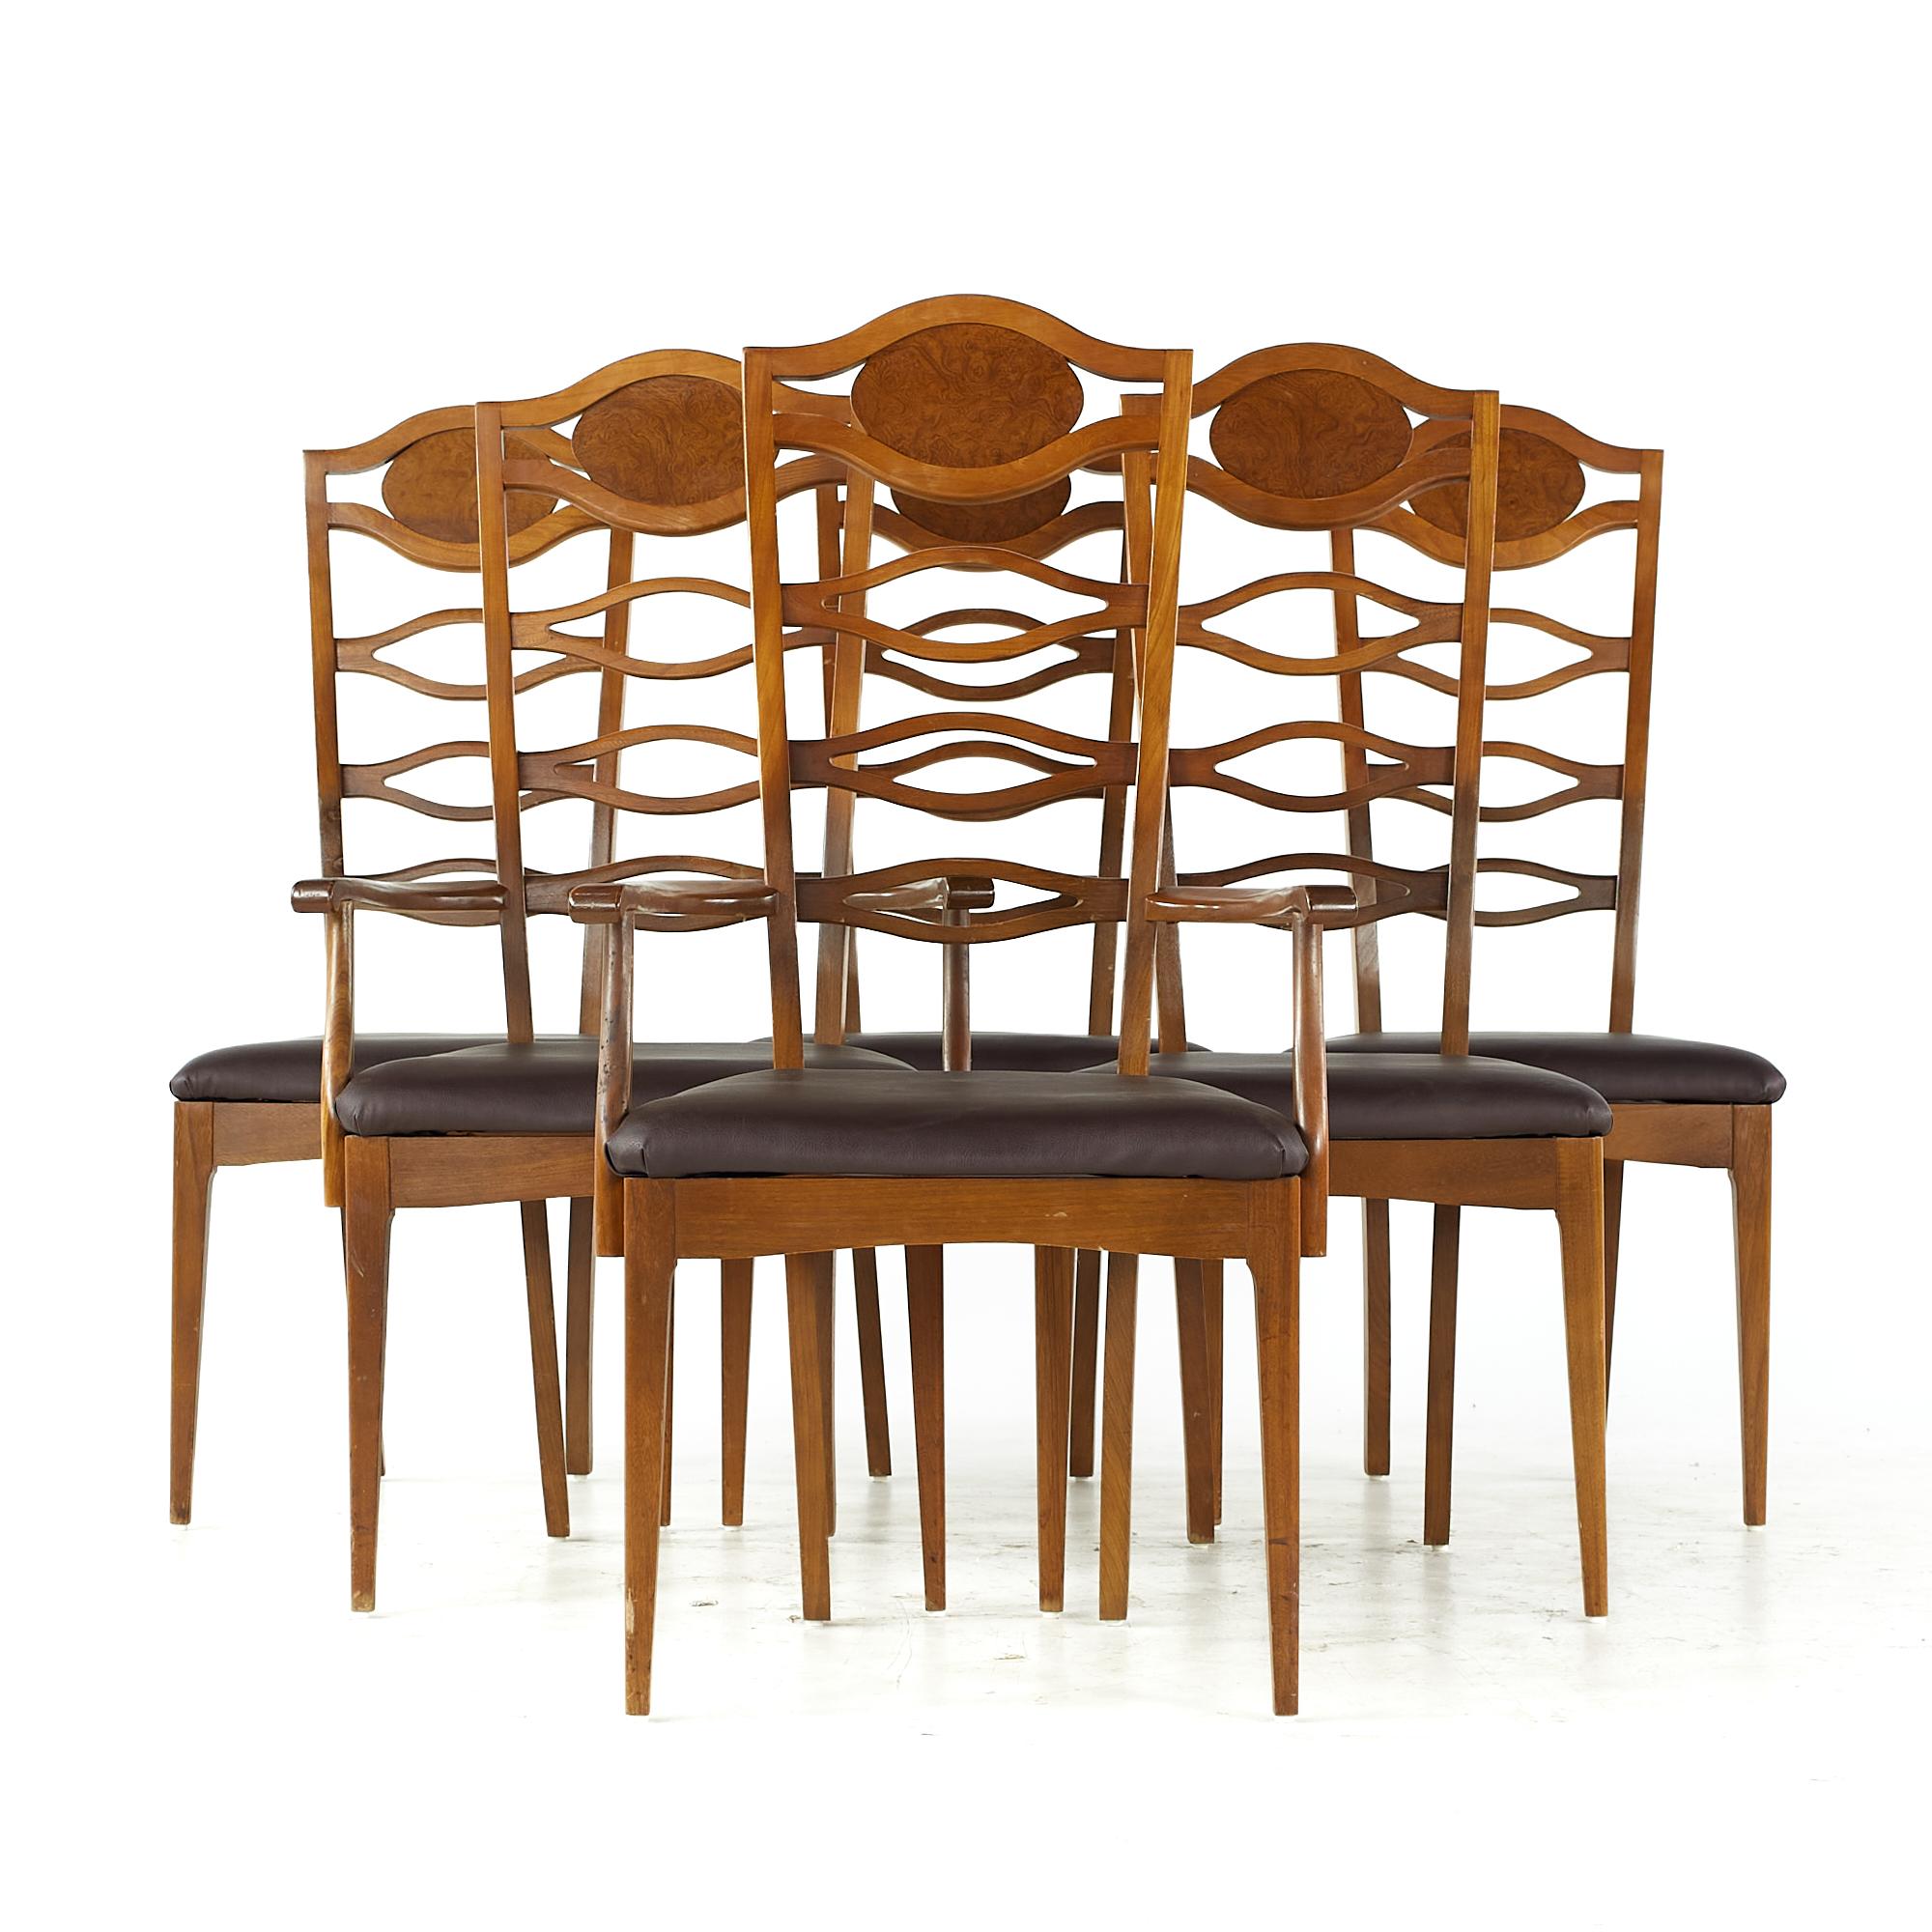 Young Manufacturing midcentury walnut and burlwood dining chairs - set of 6

Each armless chair measures: 21 wide x 21 deep x 46.25 high, with a seat height of 19.5 inches
Each captains chair measures: 24.5 wide x 22 deep x 46.25 high, with a